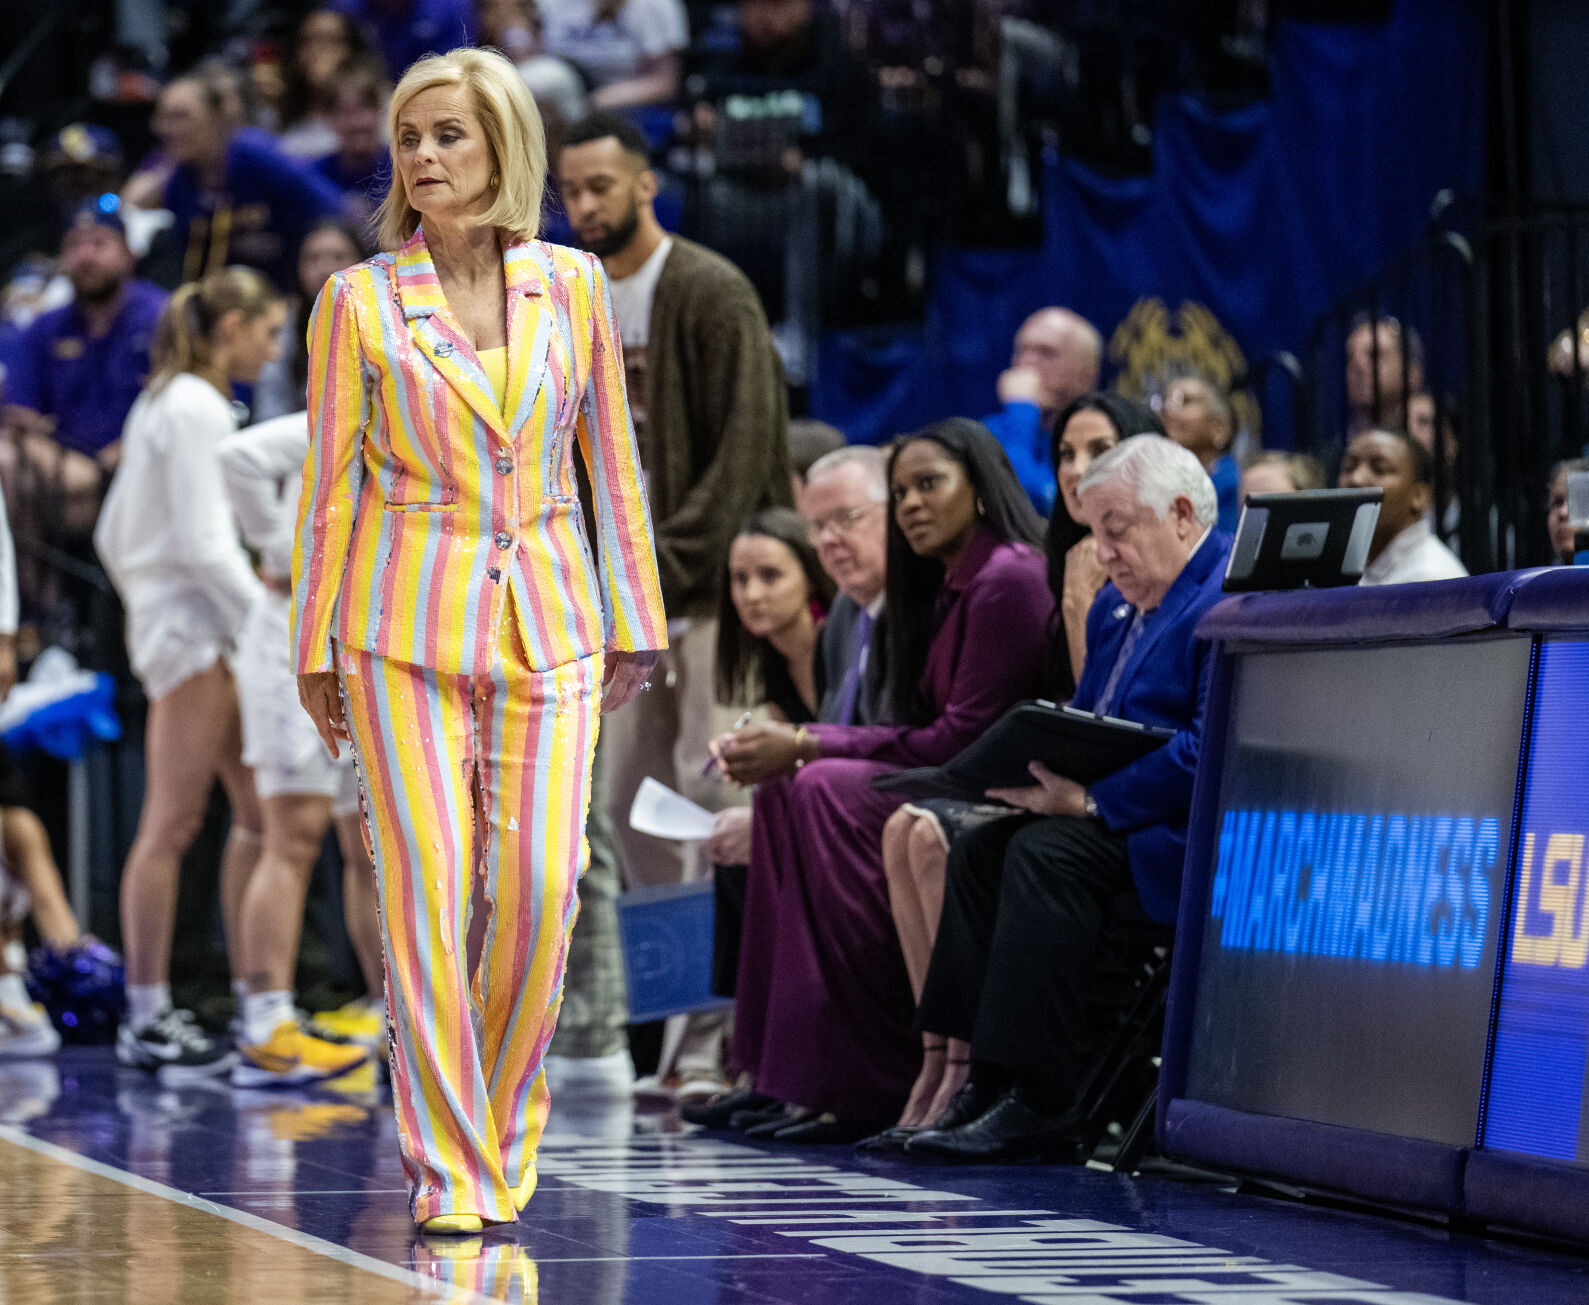 Here are 5 things to watch as the LSU women gear up for a Sweet 16 clash with UCLA